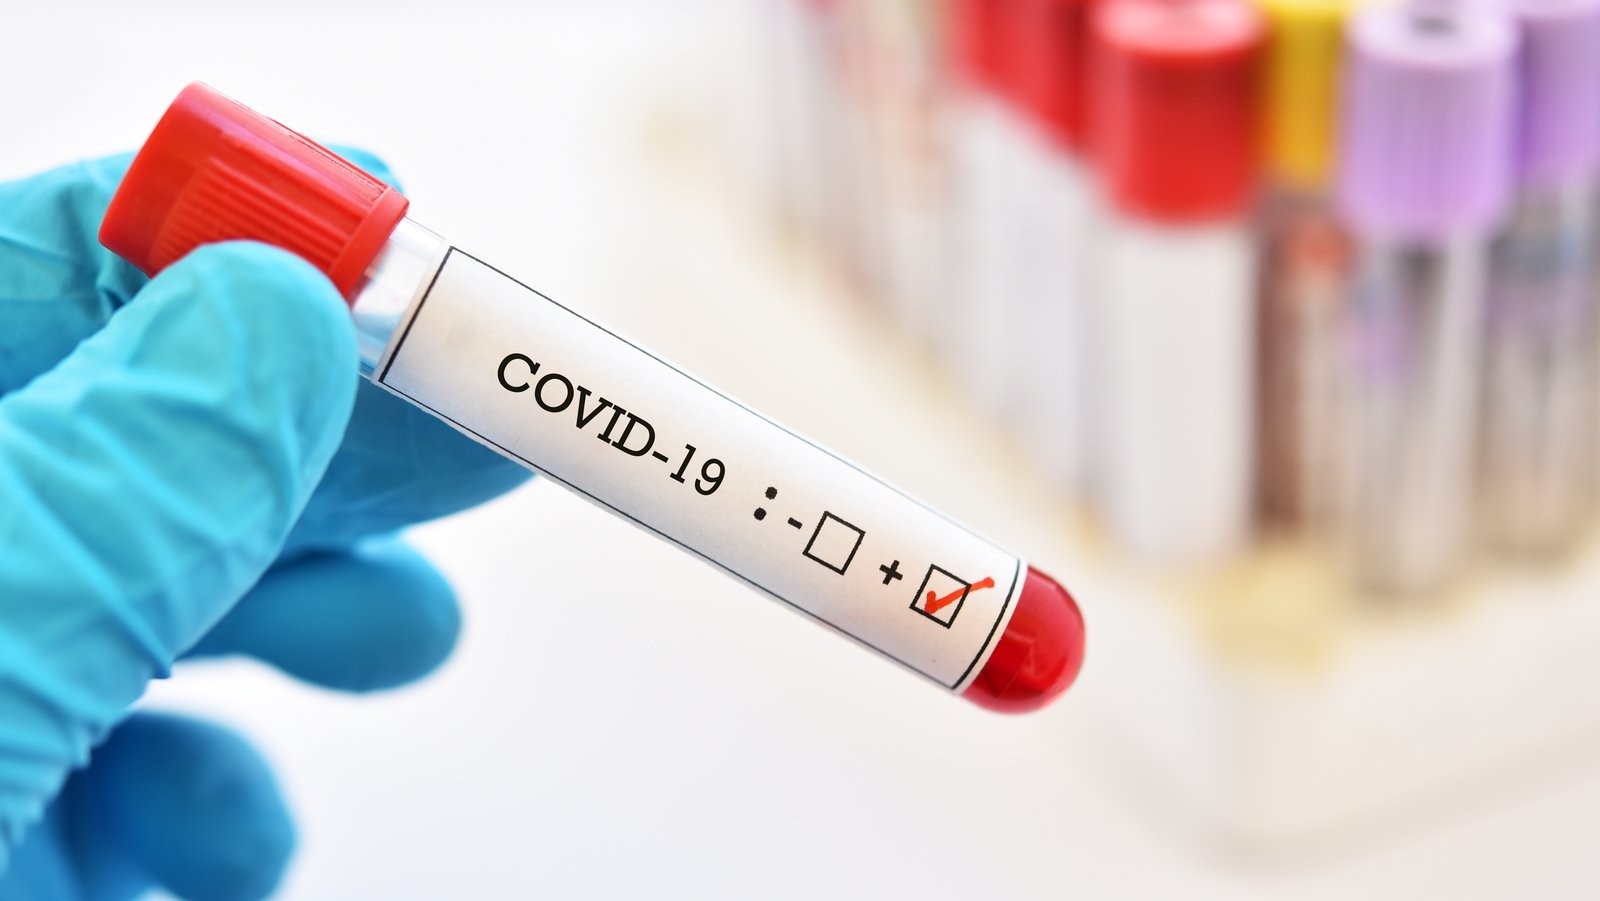 Covid-19: Two more deaths, nine additional cases